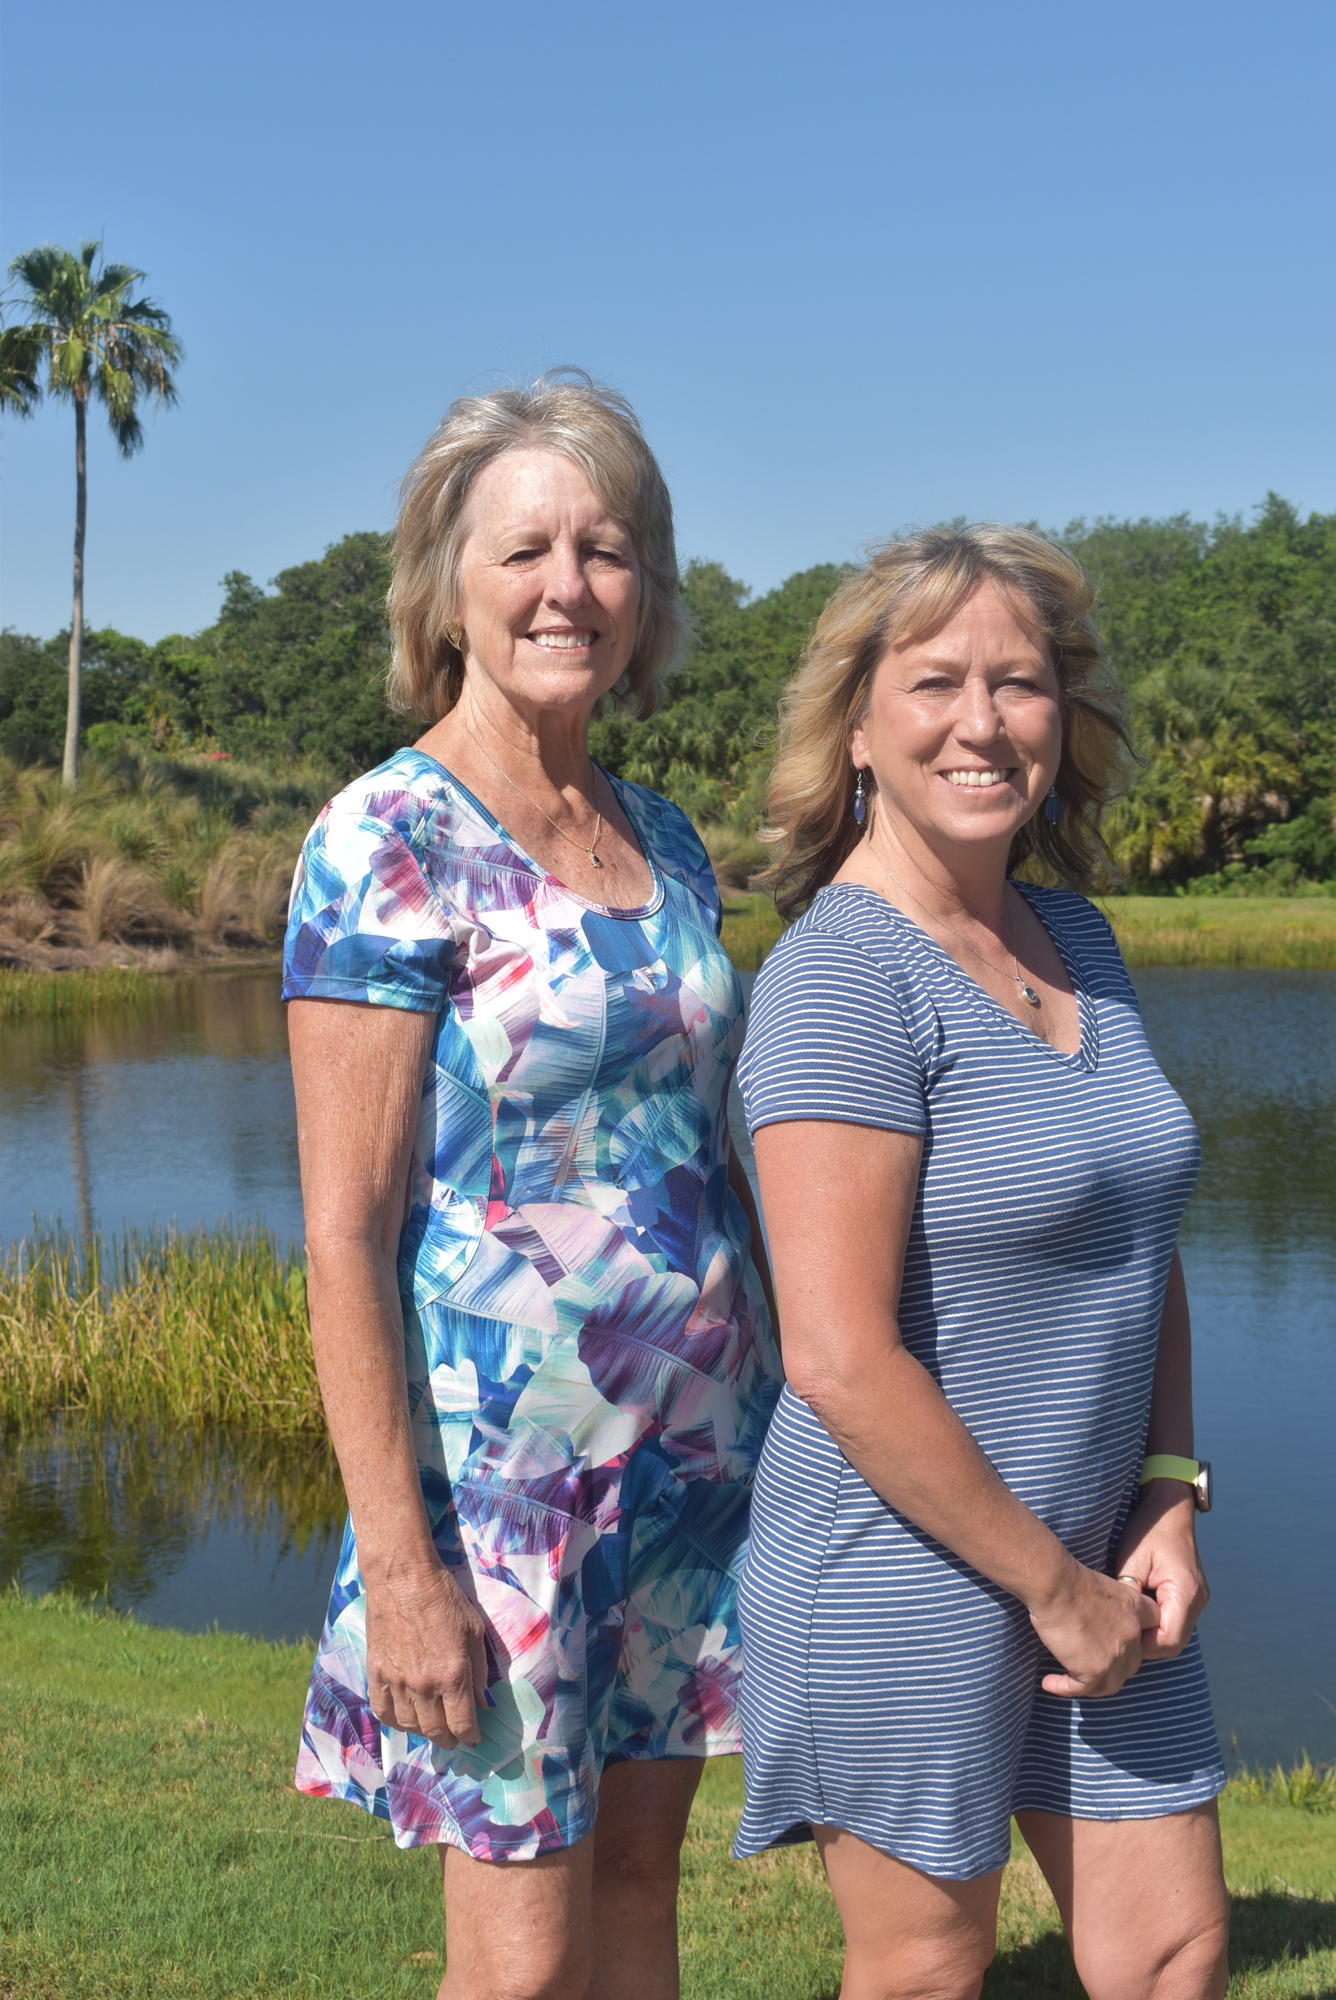 Heritage Harbour residents Kaye Fonte and Lisa Kleeberg started a Nextdoor group called 